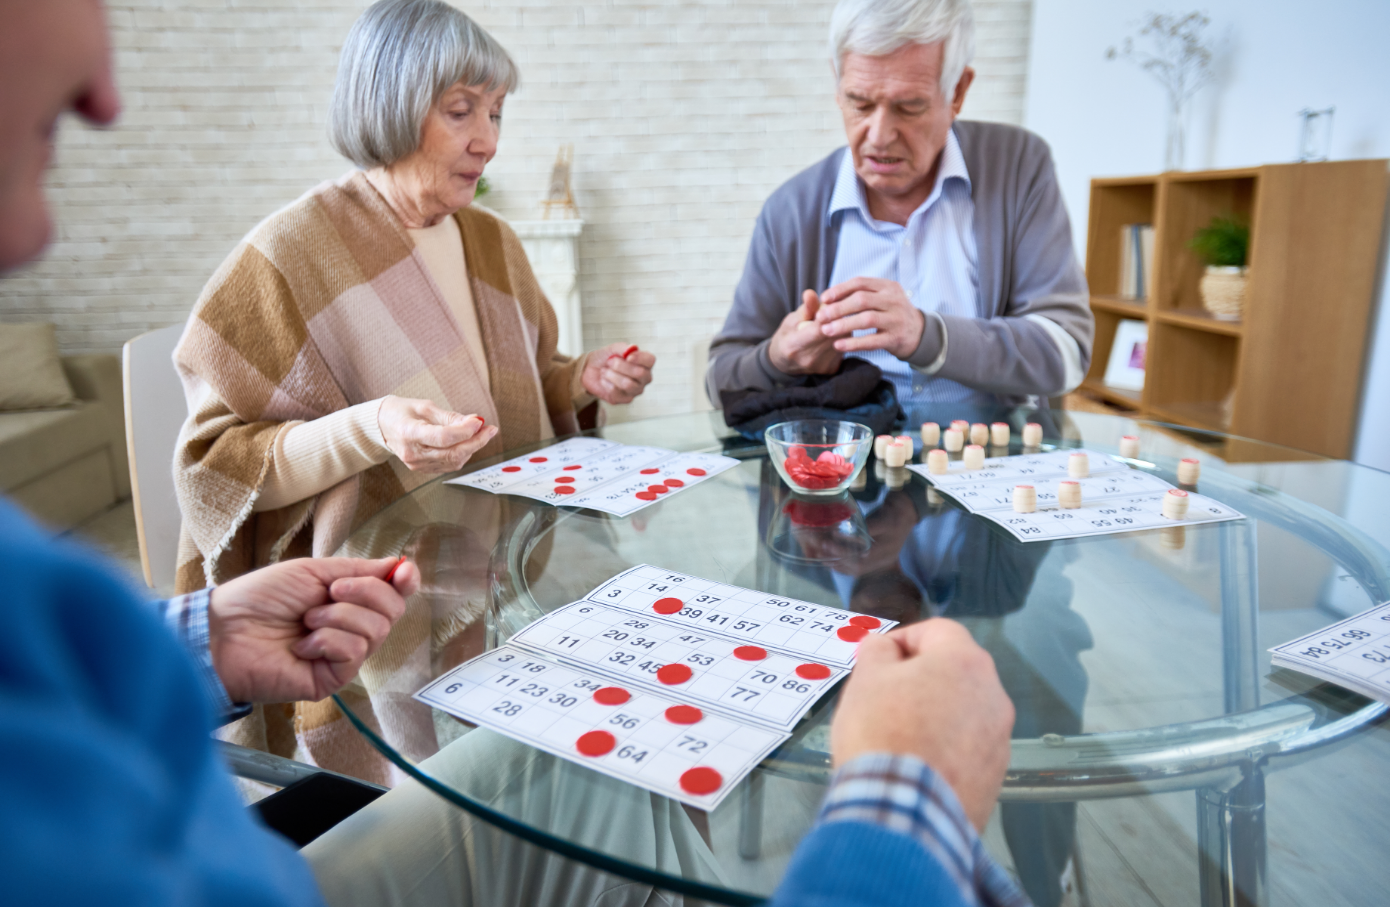 100+ Activities for Seniors in Assisted Living